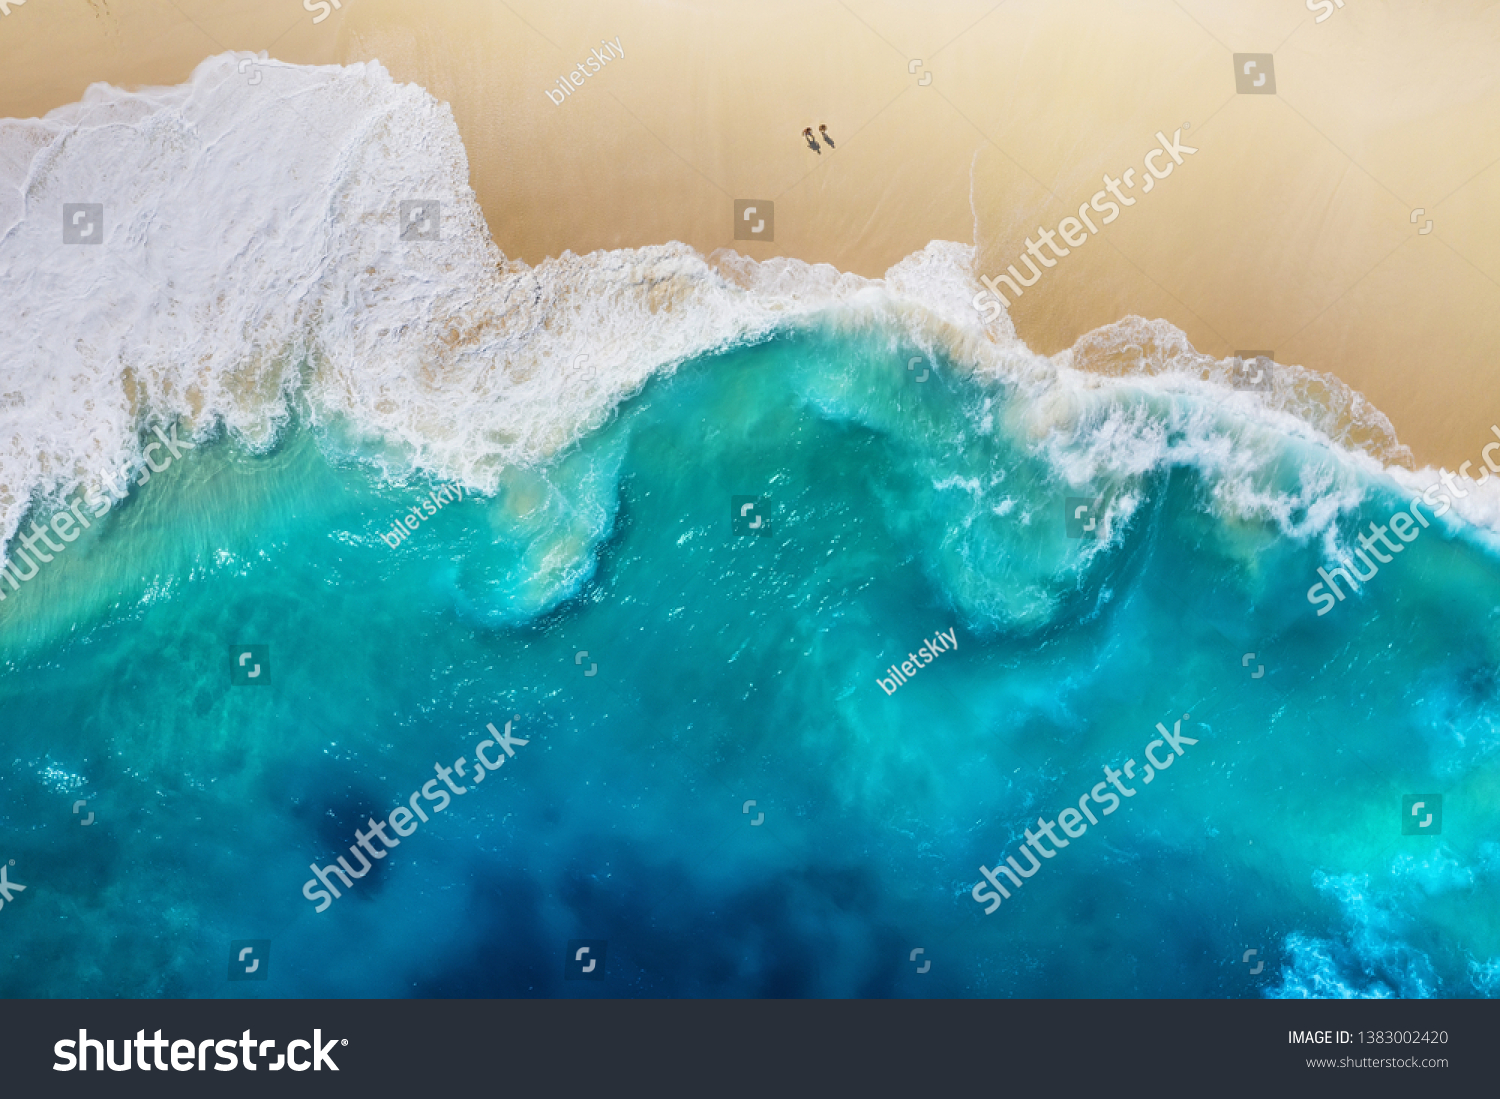 Coast as a background from top view. Turquoise water background from top view. Summer seascape from air. Nusa Penida island, Indonesia. Travel - image #1383002420